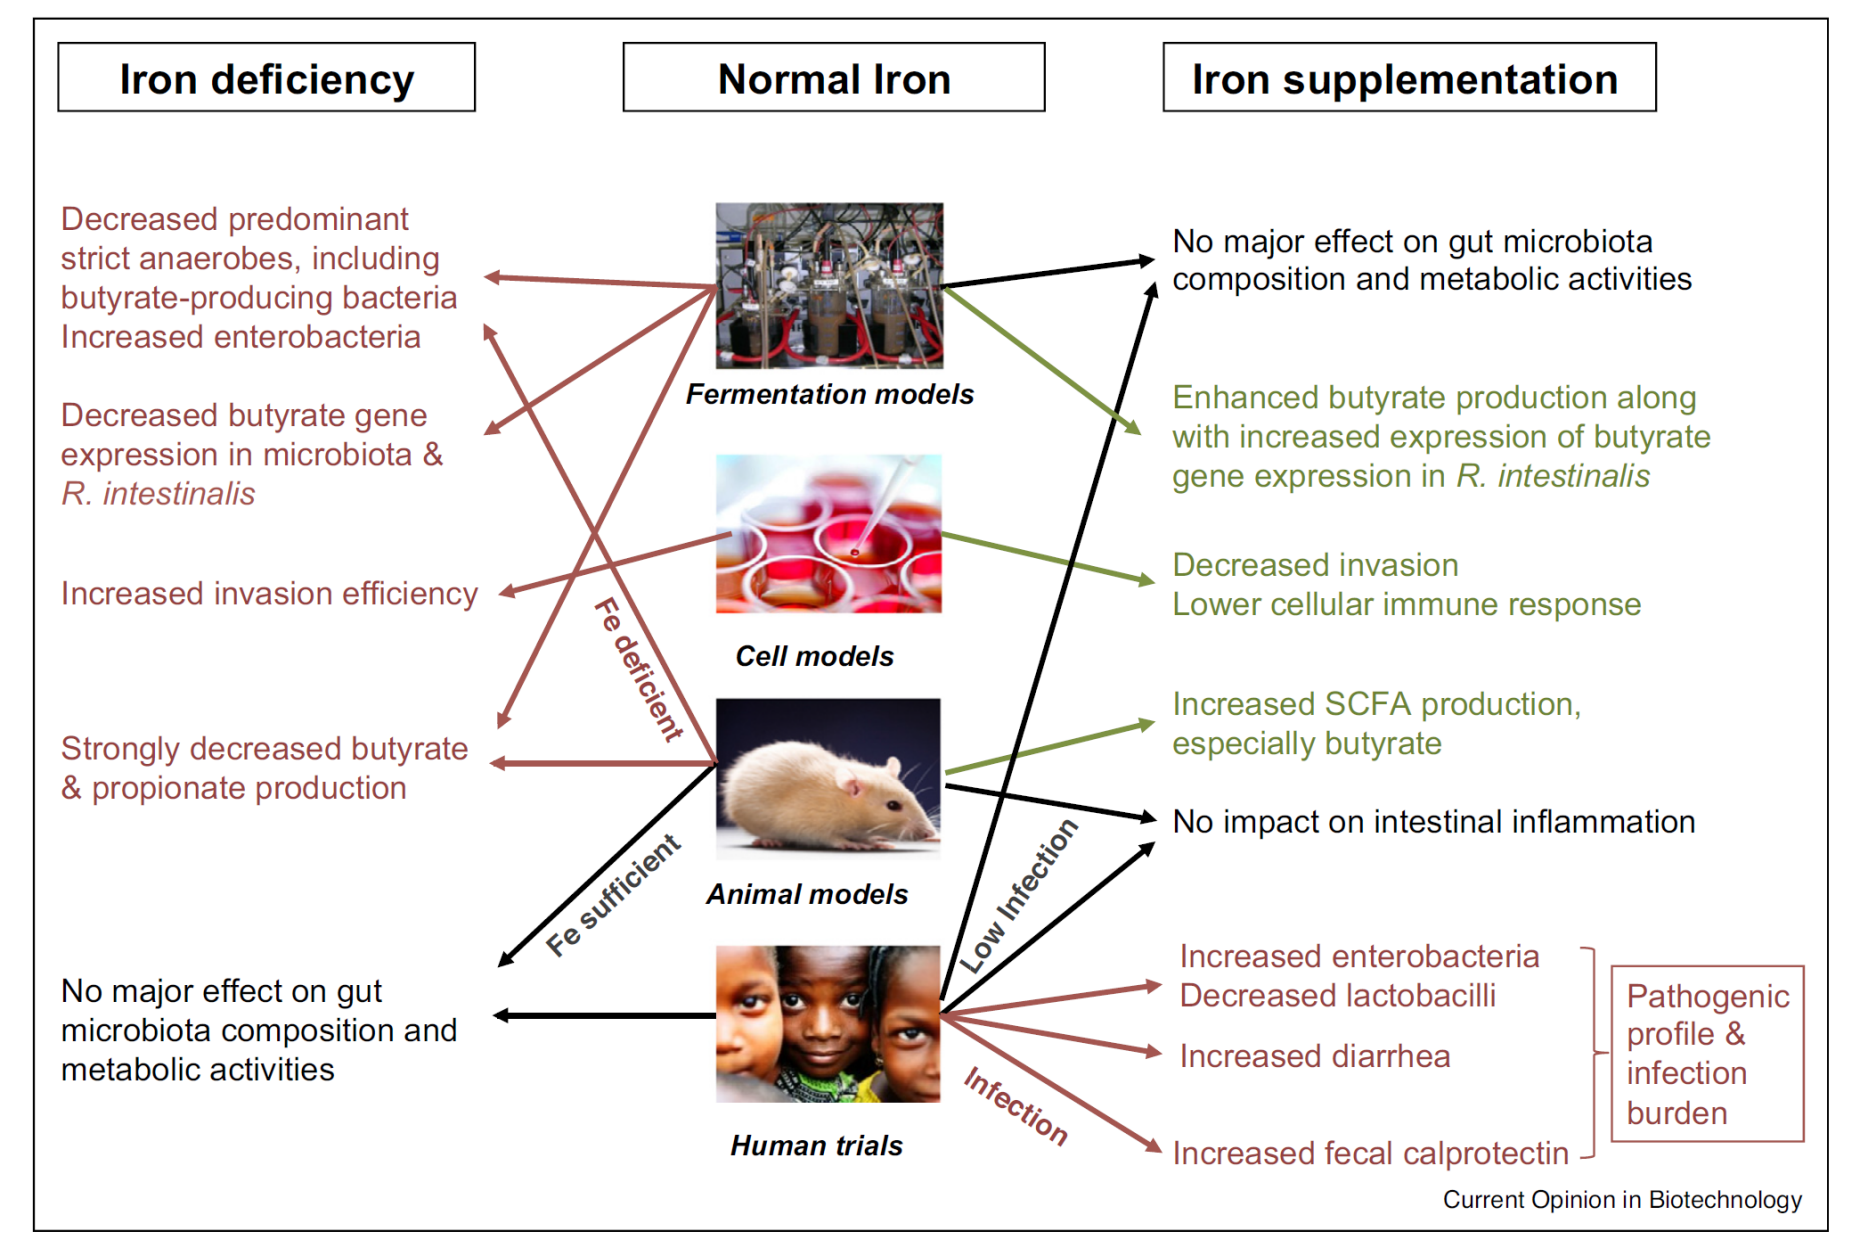 Enlarged view: Illustration of an integrated multiscale strategy used to investigate mechanisms of iron deficiency and iron supplementation on gut microbiota andgut health of African infants and children: negative (red), and neutral (black) and positive effects (green). (Lacroix et al. 2015 Current Opinion in Biotechnology 32:149)